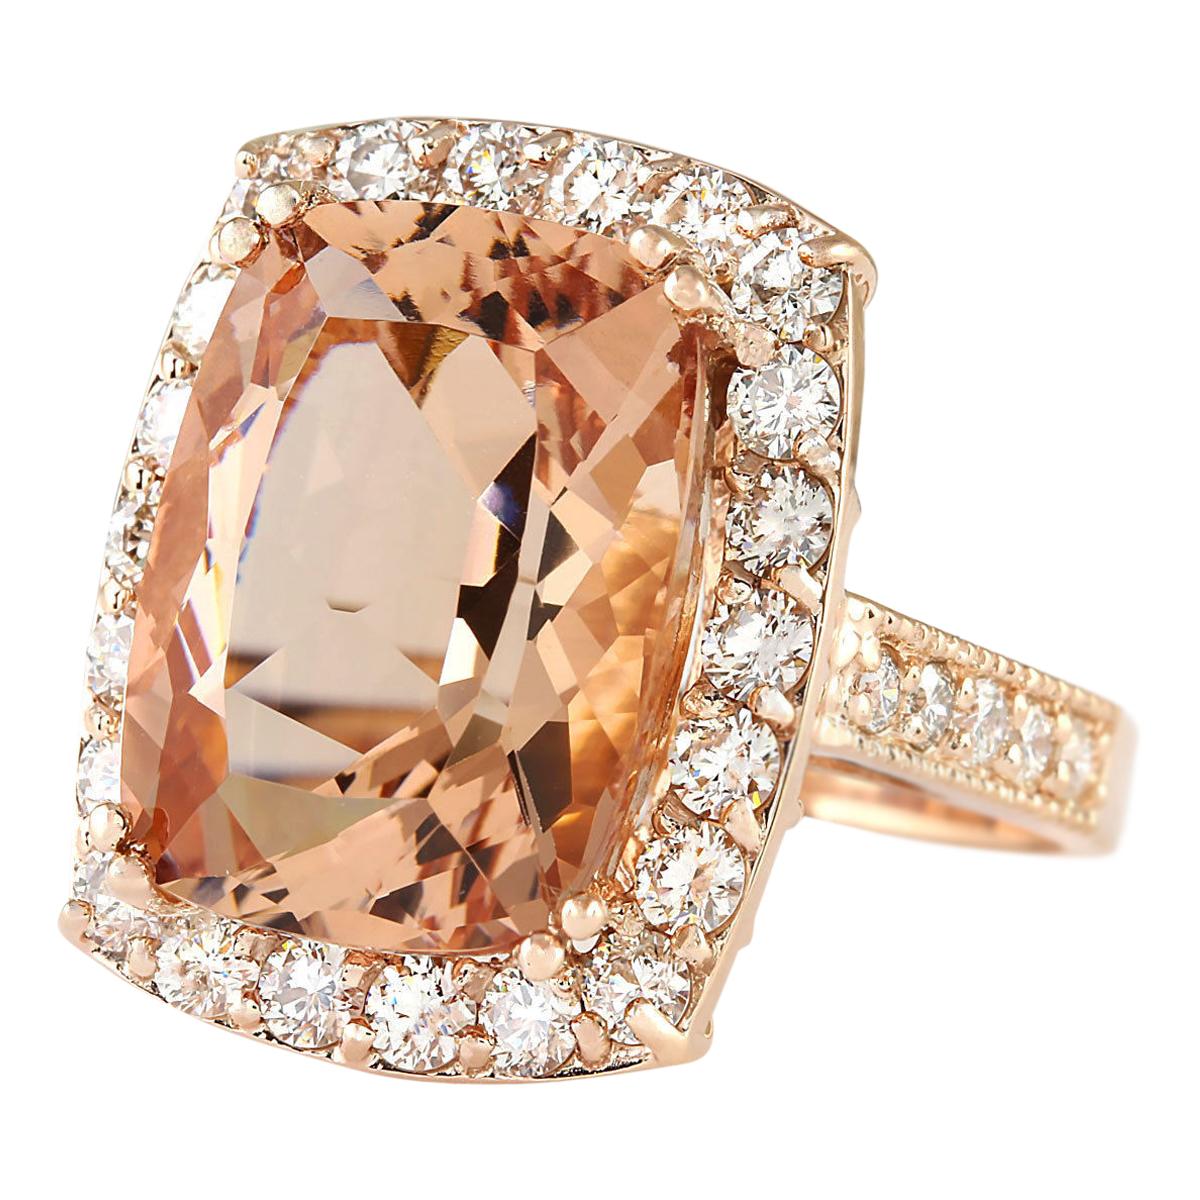 Stamped: 14K Rose Gold
Total Ring Weight: 7.0 Grams
Morganite Weight is 10.48 Carat (Measures: 16.00x12.00 mm)
Color: Peach
Diamond Weight is 1.30 Carat
Color: F-G, Clarity: VS2-SI1
Face Measures: 20.75x16.90 mm
Sku: [703473W]